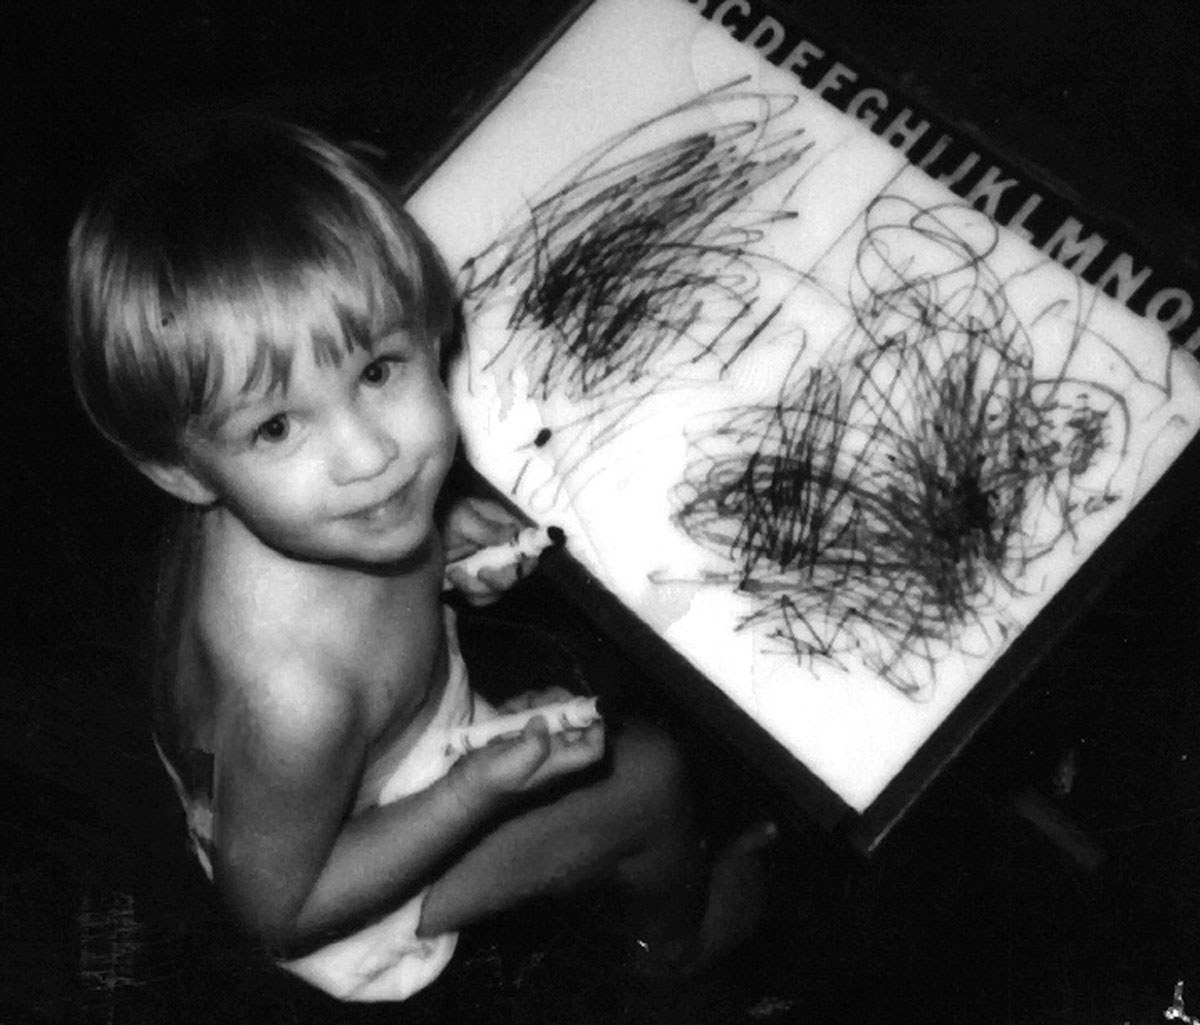 19 month old Johnny points to his scribble